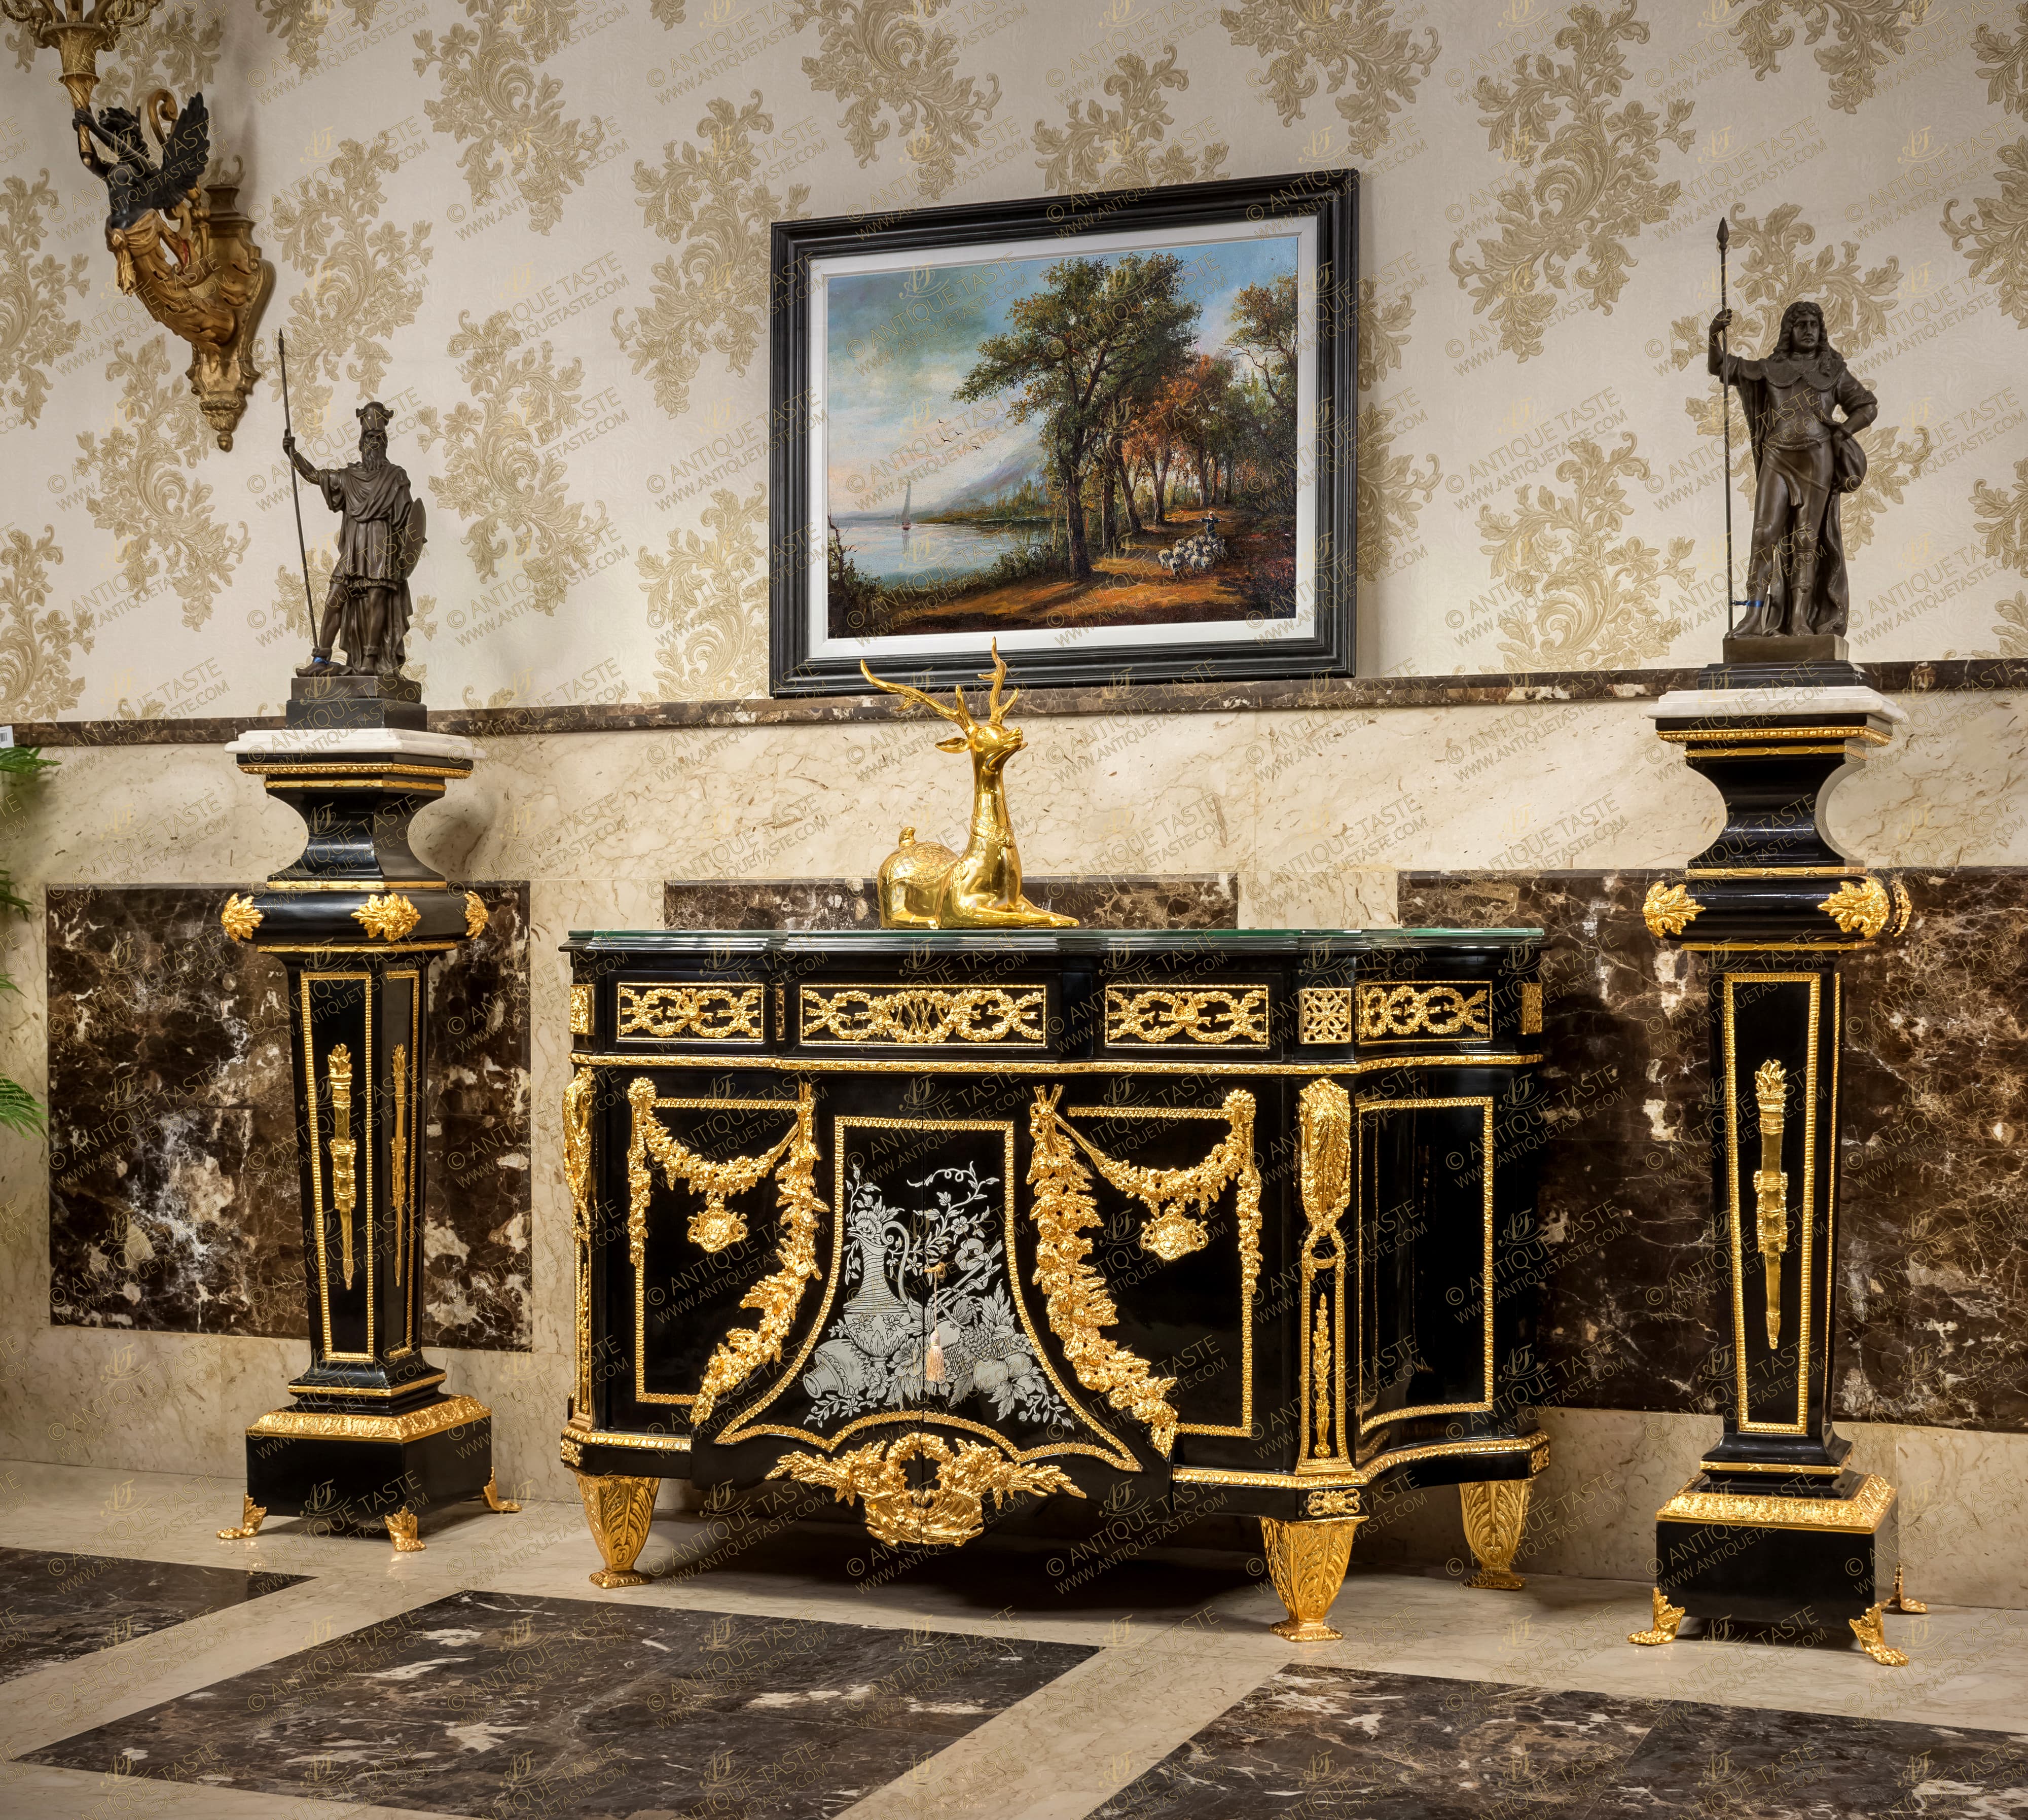 A sensational and contemporary vintage French late 19th Century Louis XVI Neoclassical style gilt ormolu-mounted and black lacquered Pedestal Stands after the model by Paul Sormani; Surmounted by a mottled veined marble top above a strait Fillet on a beaded Ovolo with Egg-and-Dart ormolu band above a concave shaped neck embellished up and down with reeded cross-band strips; the astragal below is of convex form and ormolu accented with large double detailed acanthus leaves to each corner and followed with a repeated ormolu strip below; The tapering form recessed body framed to each side with a leaf-and-dart ormolu encradement and ornamented to each center with finely chiseled large ormolu mounts of ormolu quiver and the eternal flame of life, the body terminates below above the plinth in a protruding rimmed base ornamented with a hammered cross-band ormolu strip; All above a square plinth surmounted with a fine cast acanthus Cyma-Reversa style robust ormolu trim band and raised on intricately chiseled ormolu leafy paw feet sabots; The fine pedestal is produced in different finishes in wooden veneer inlays; white lacquer and in different sizes and styles as well per clients requests as displayed.